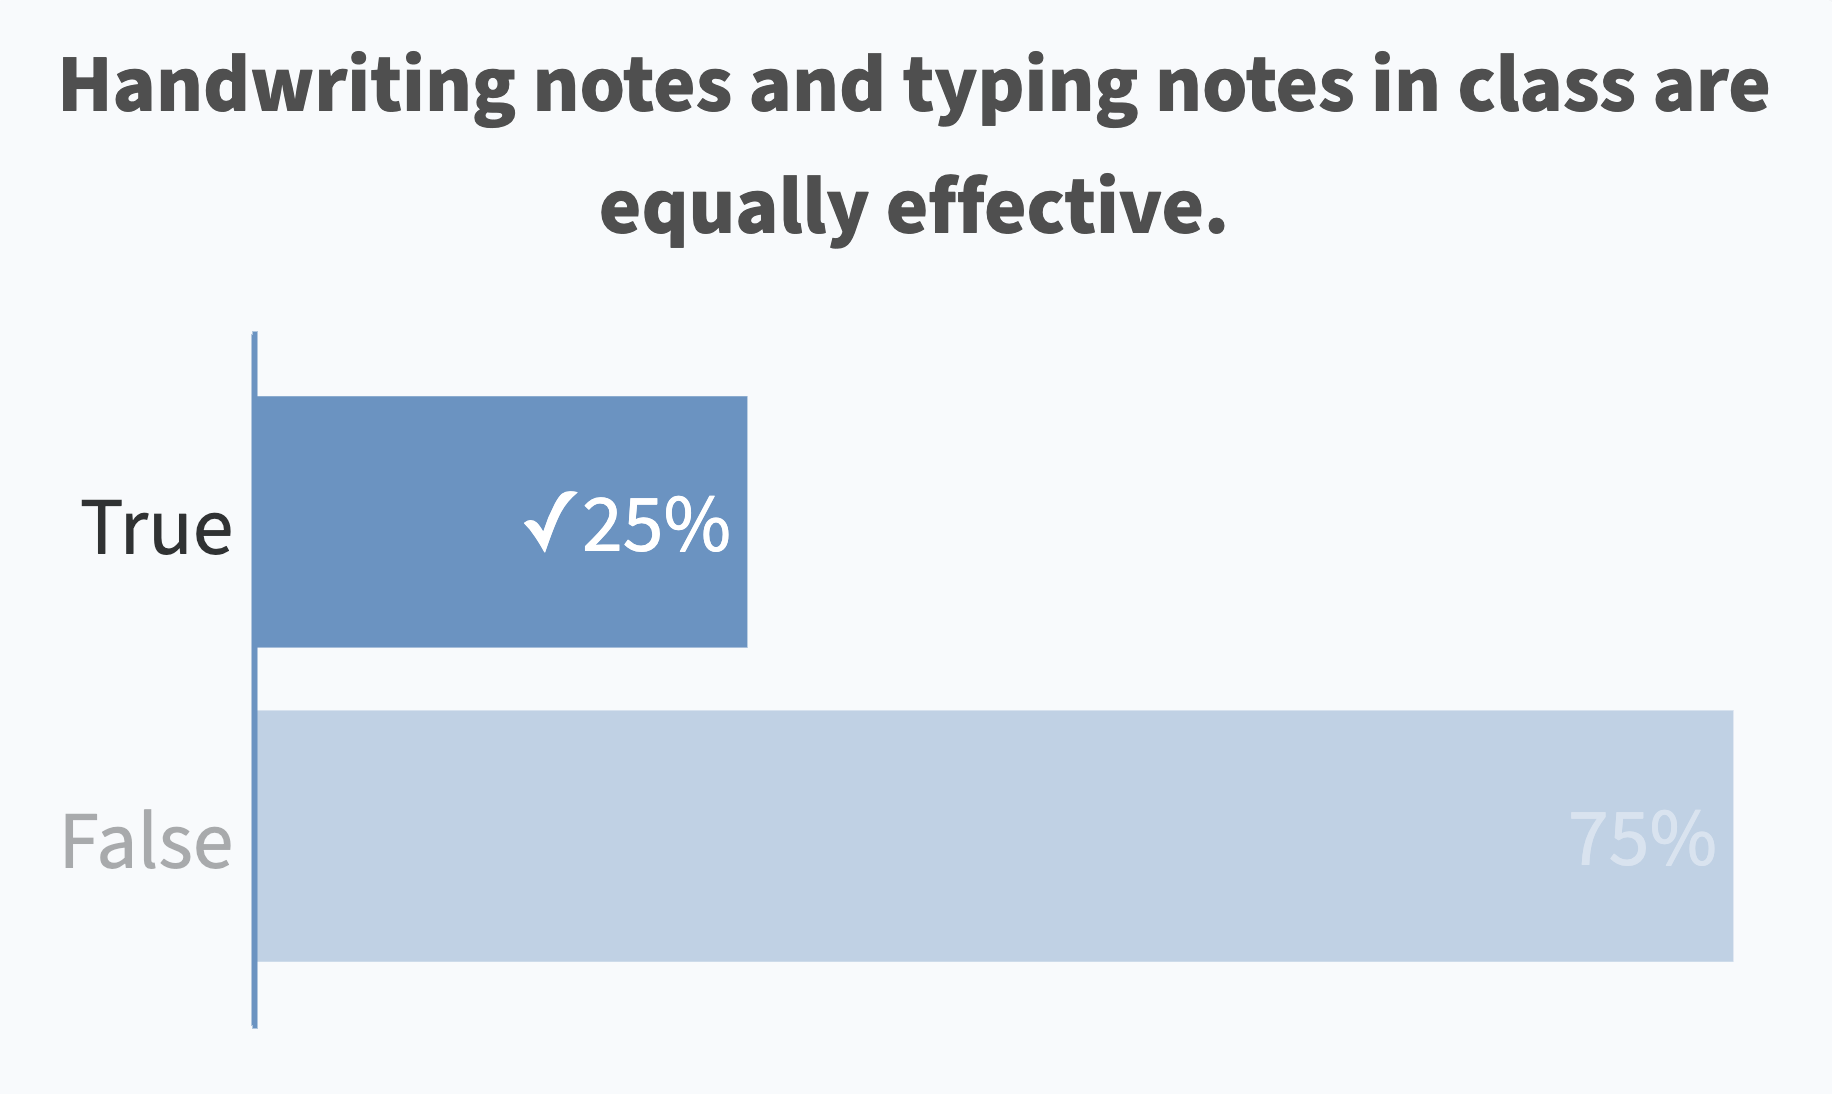 Handwriting notes and typing notes in class are equally effective. (True: 25% correct)